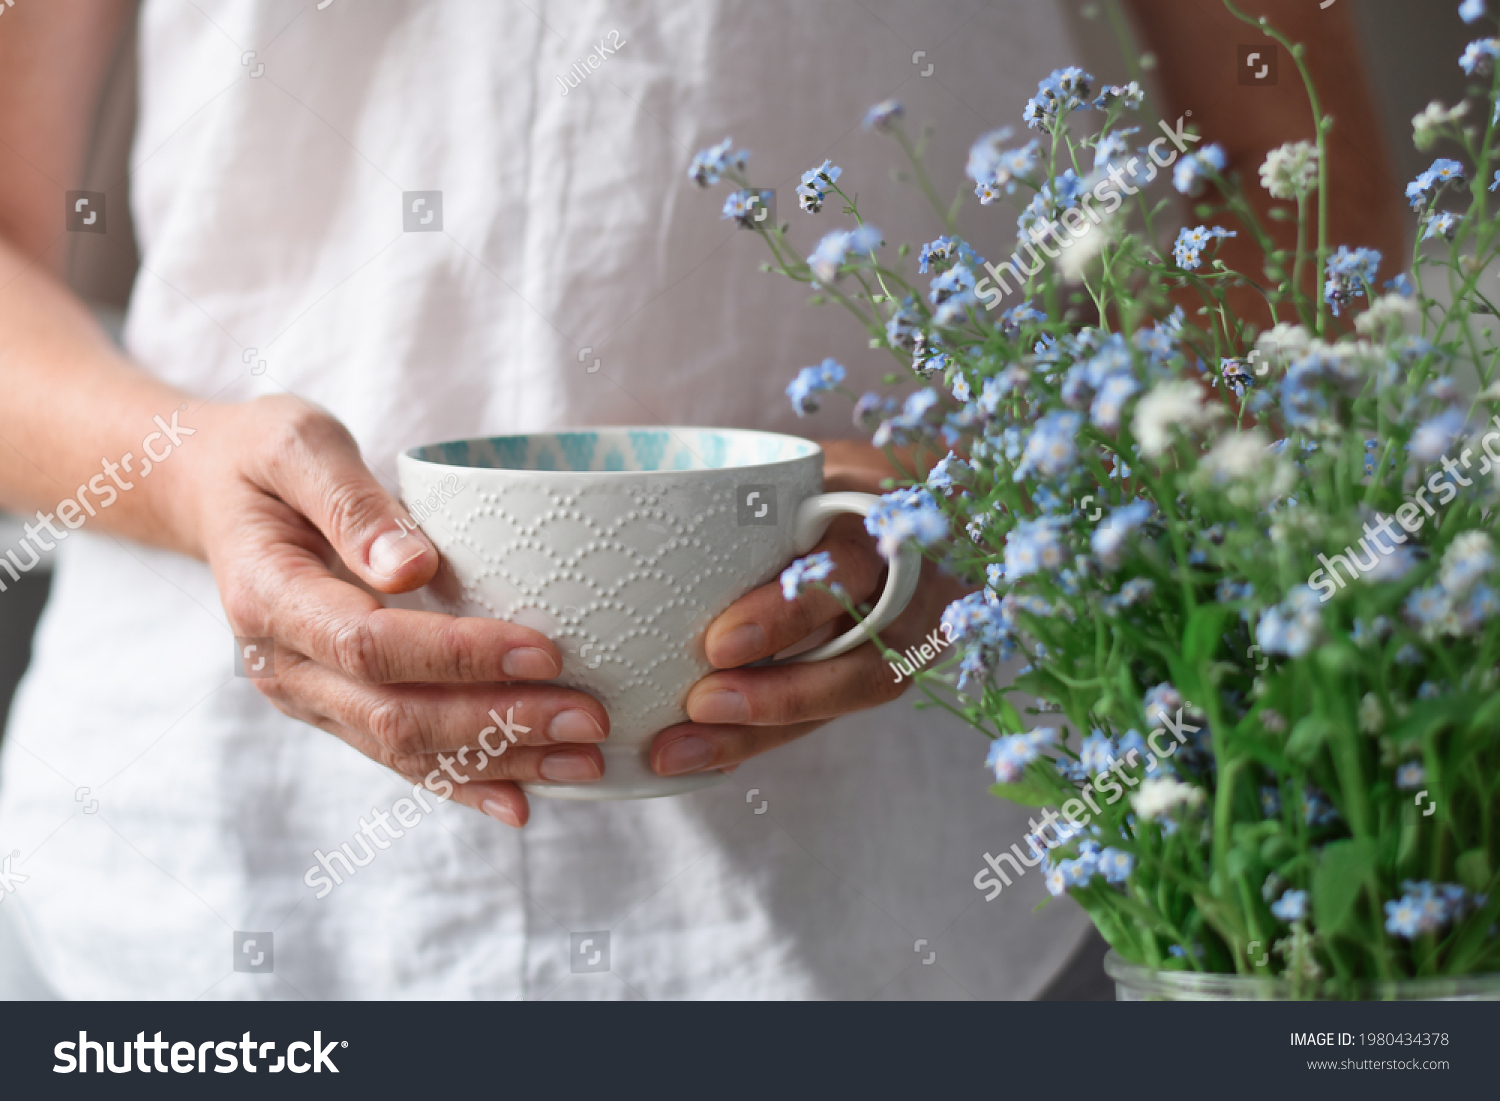 Woman's hands holding a white cup of tea or coffee beside blue flowers #1980434378